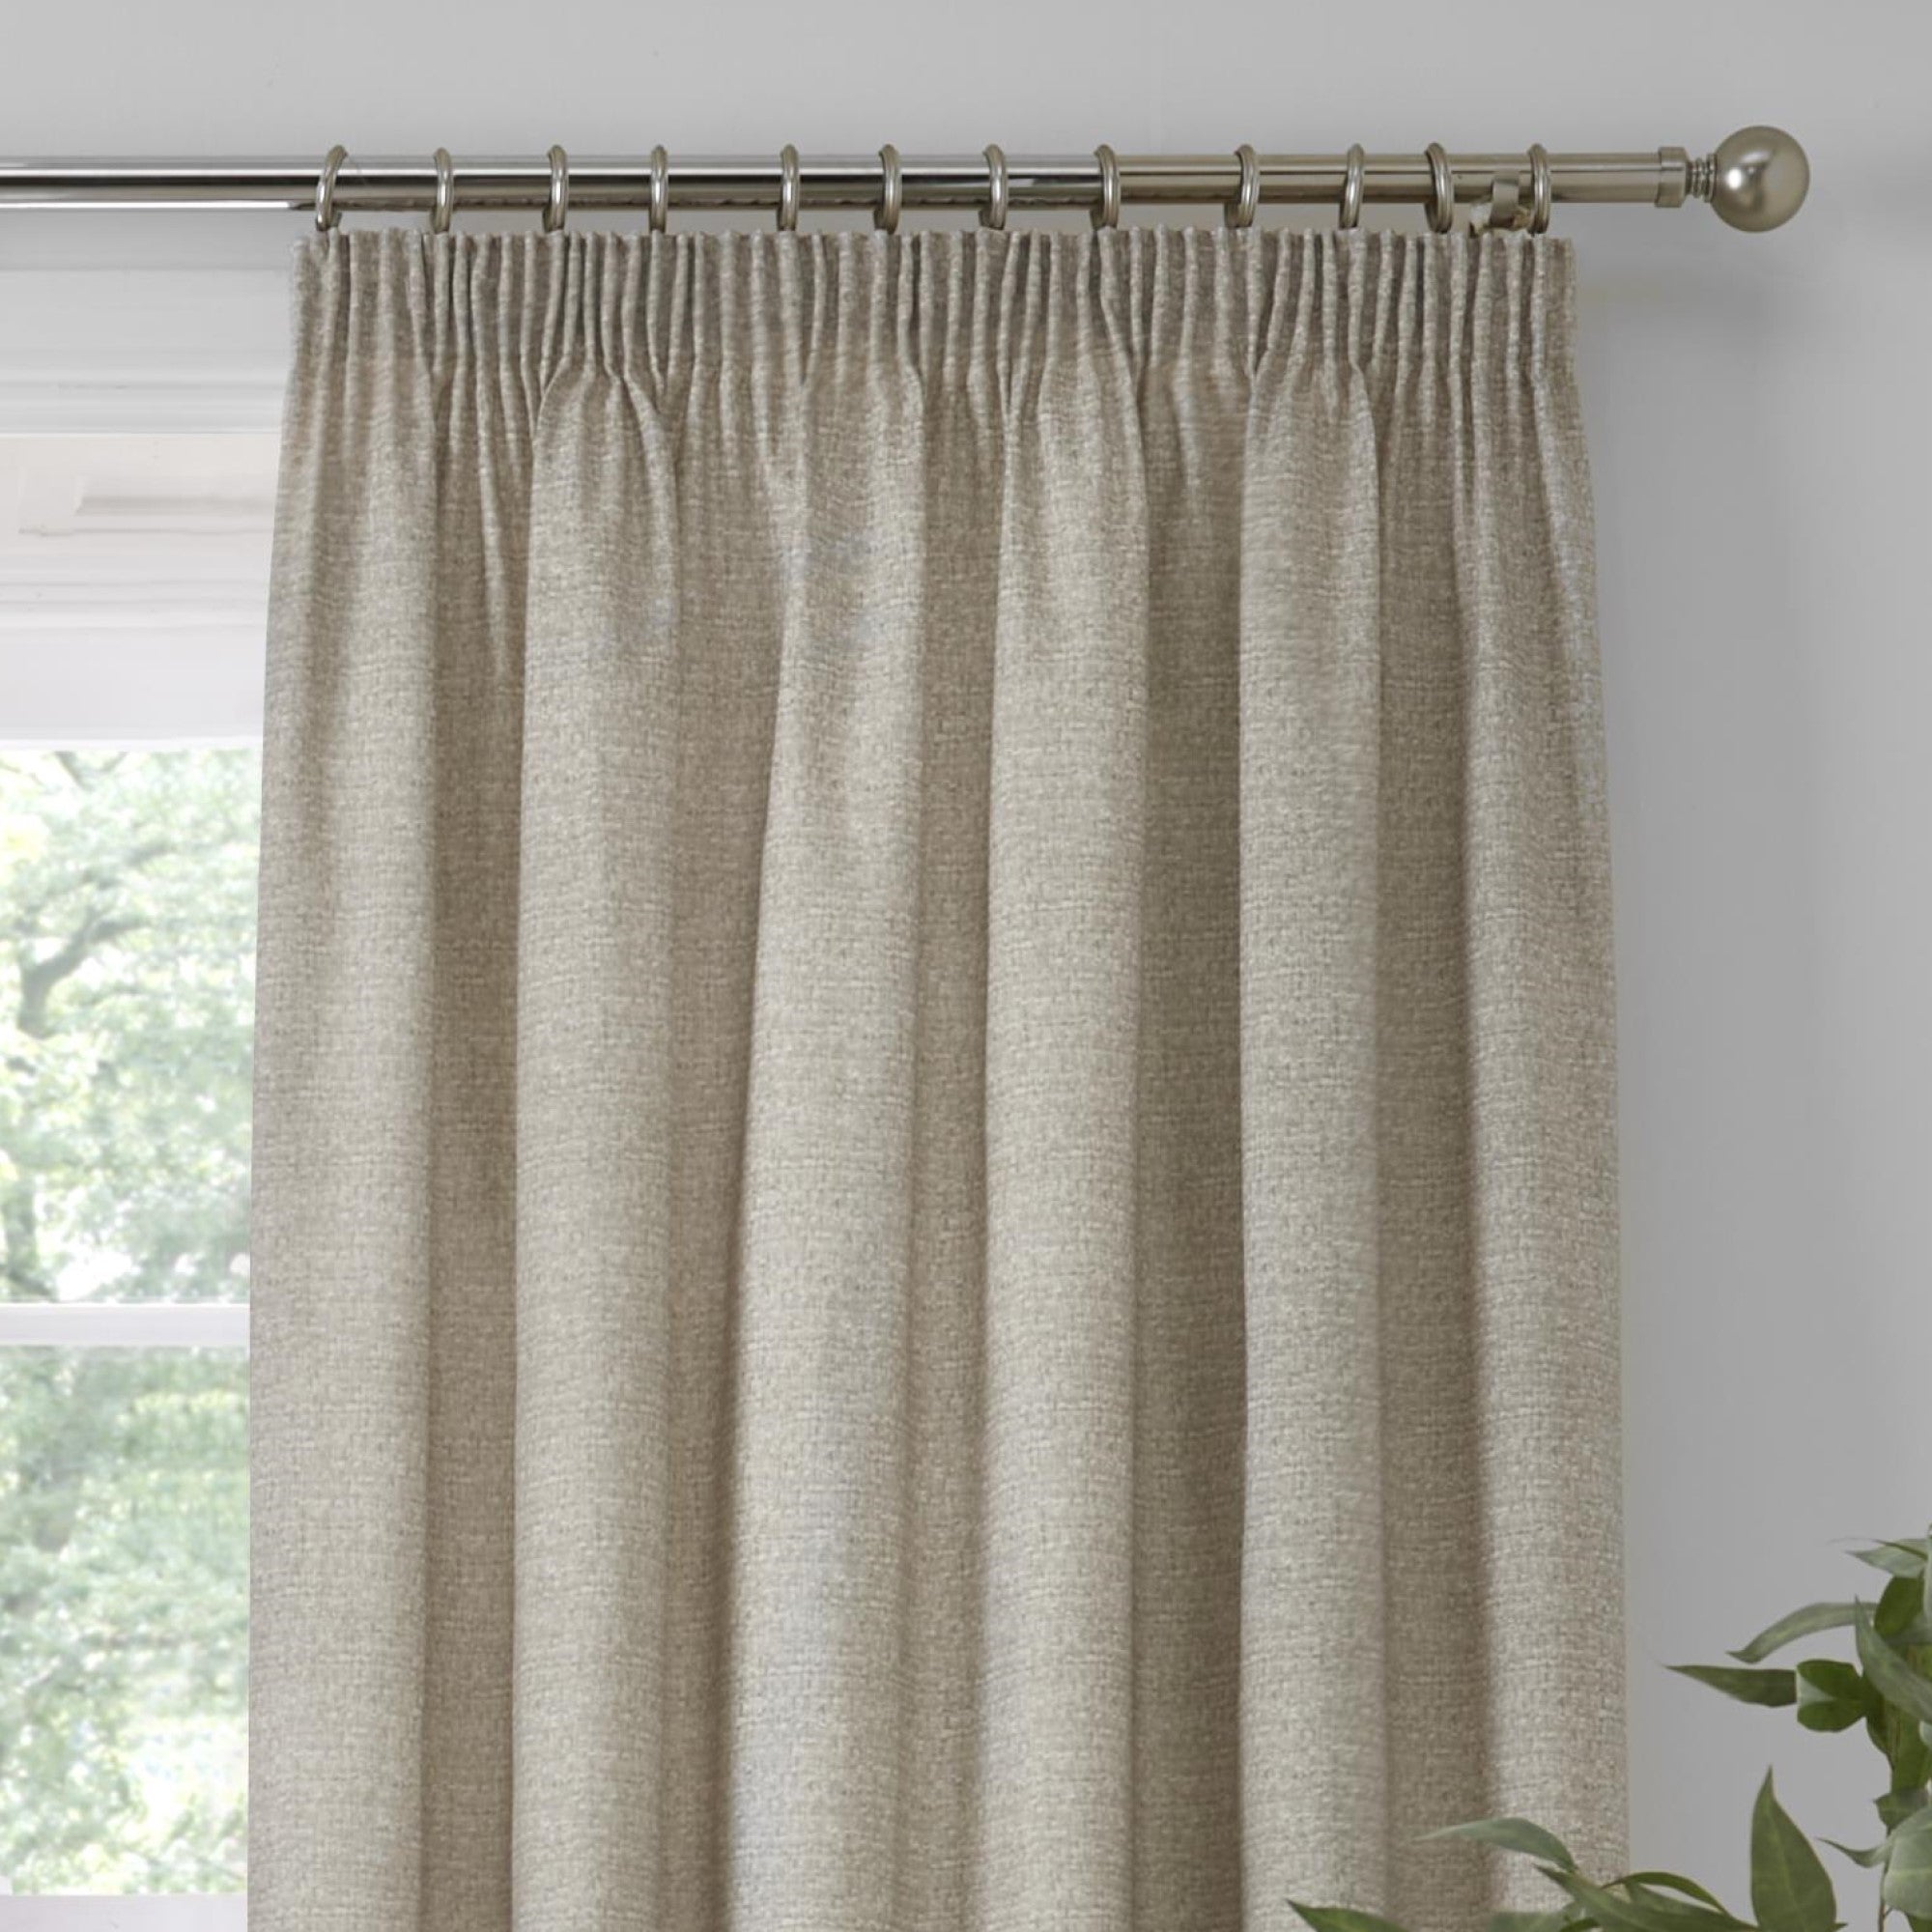 Pair of Pencil Pleat Curtains With Tie-Backs Pembrey by D&D in Natural